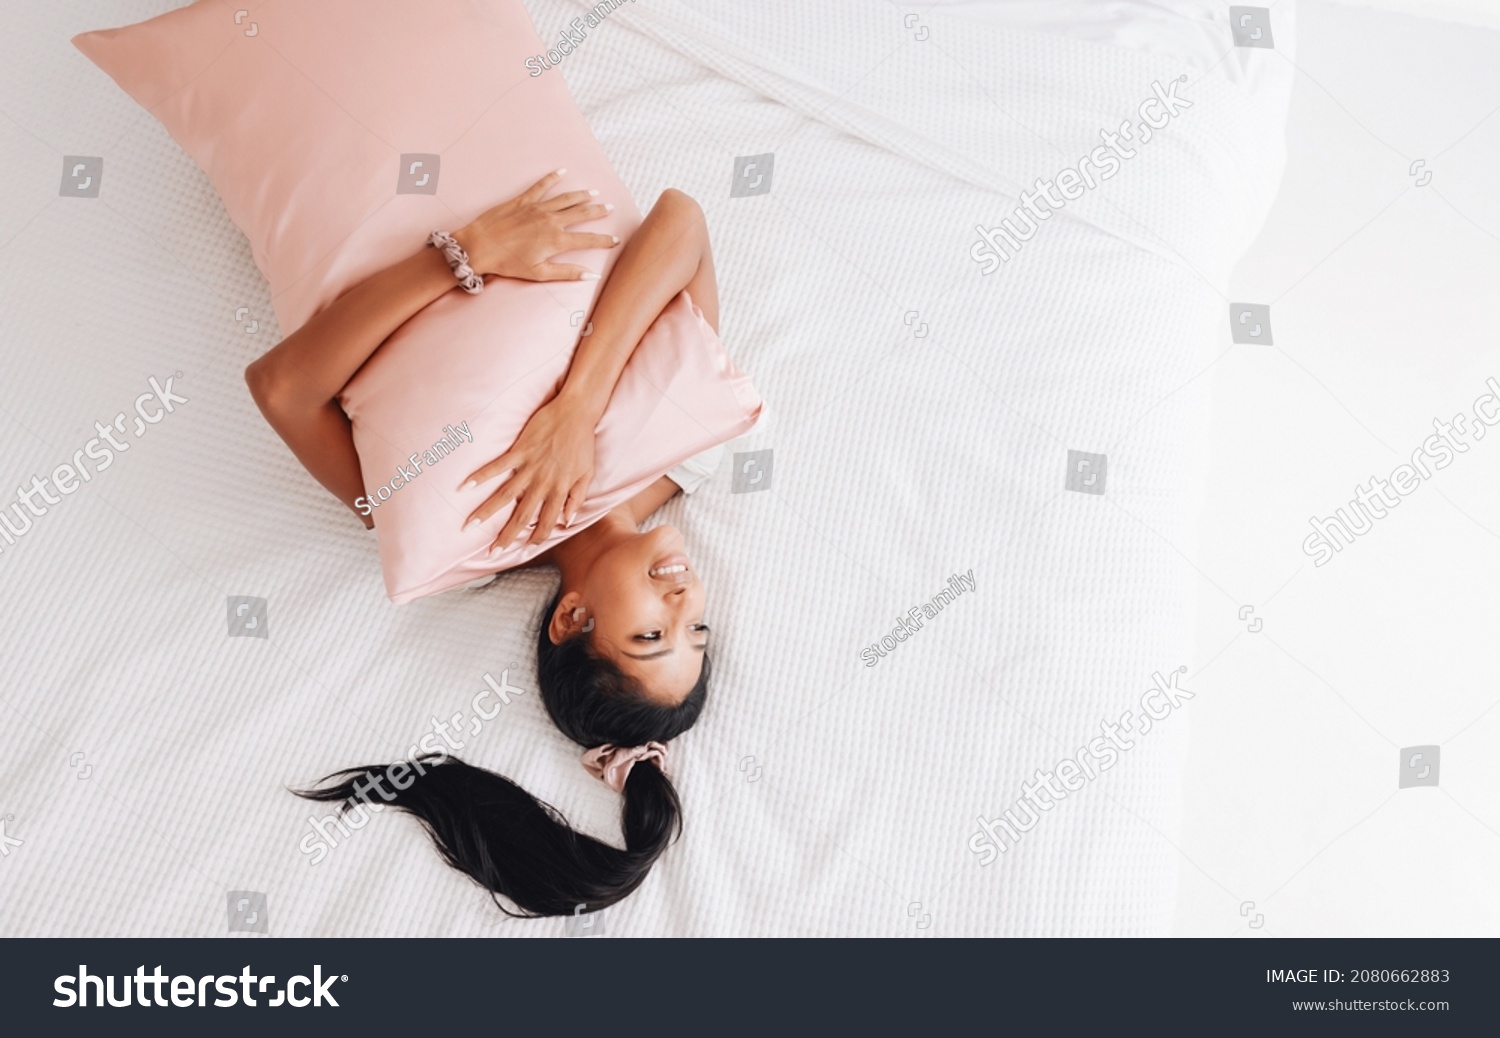 Beautiful Indonesian girl lying on a pink pillow with a silk pillowcase. View from above
 #2080662883